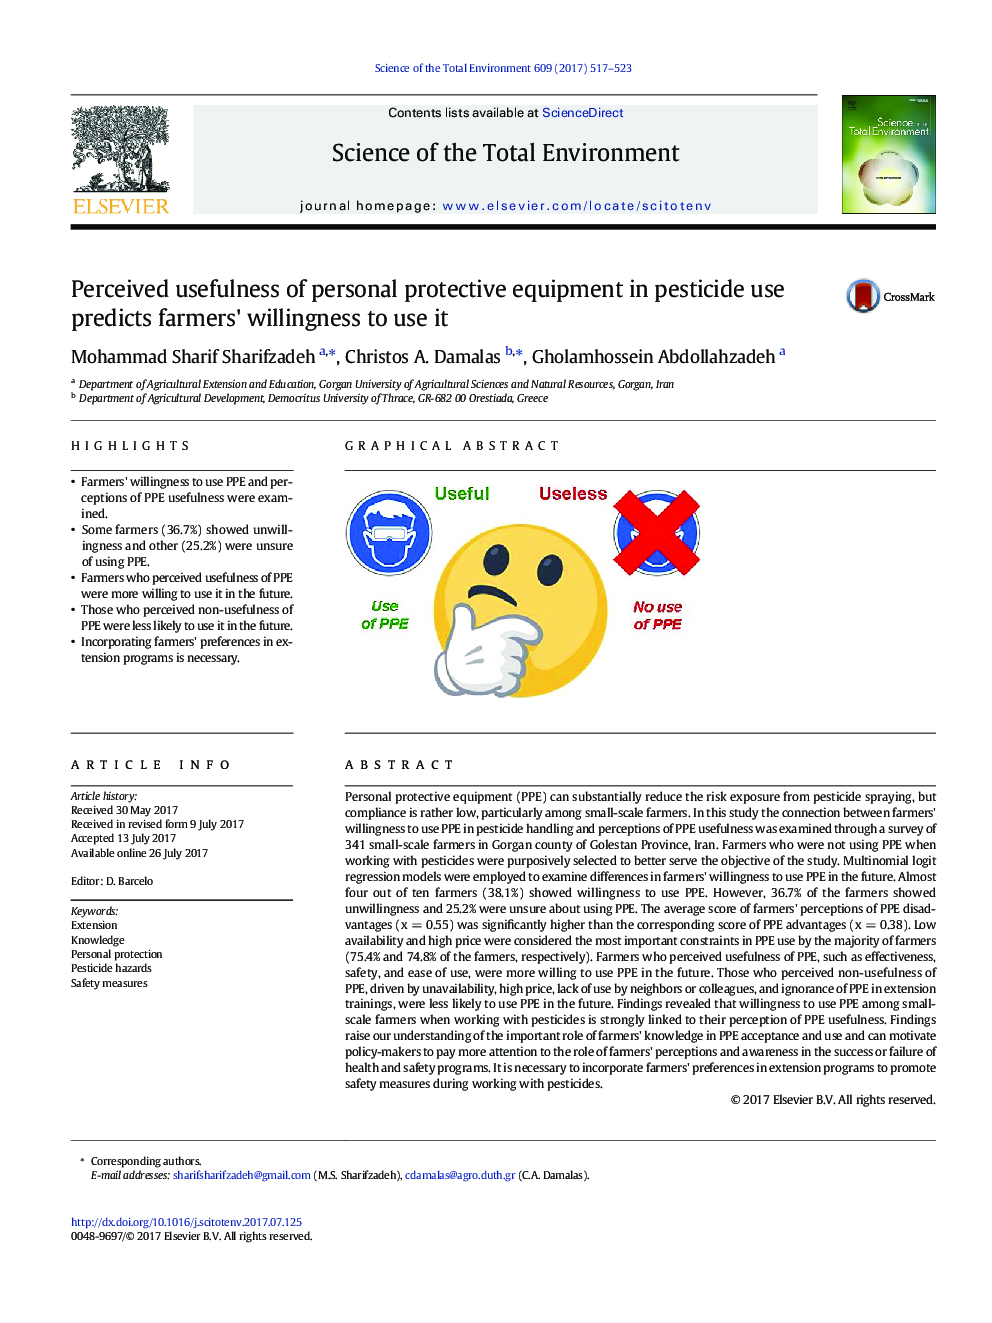 Perceived usefulness of personal protective equipment in pesticide use predicts farmers' willingness to use it